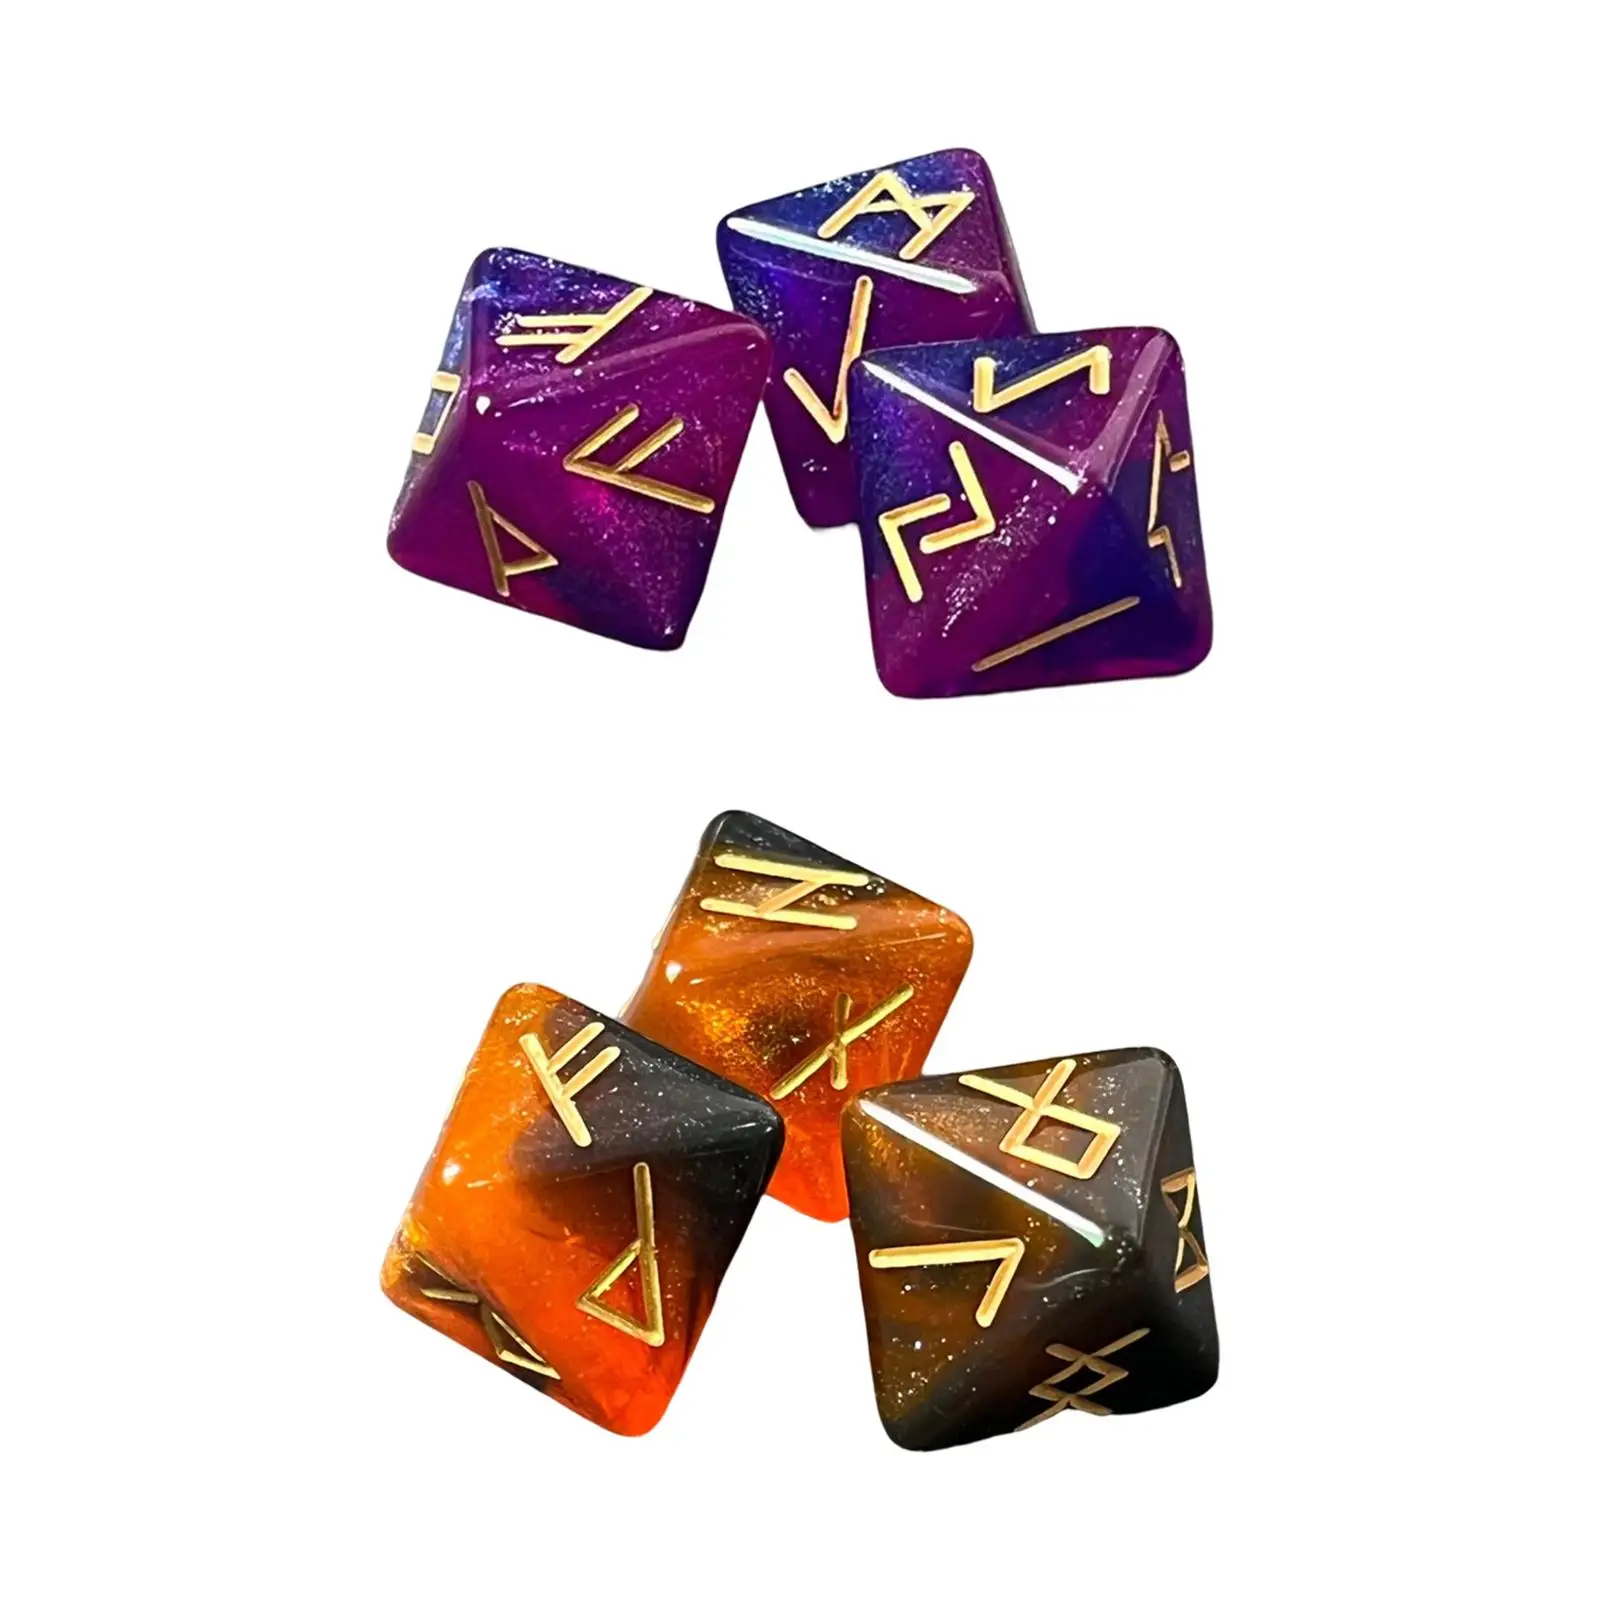 3 Pieces 12 Sided Table Game Dice Leisure and Entertainment Toys Multi Sided Astrological Dice for Role Playing Games Accessory